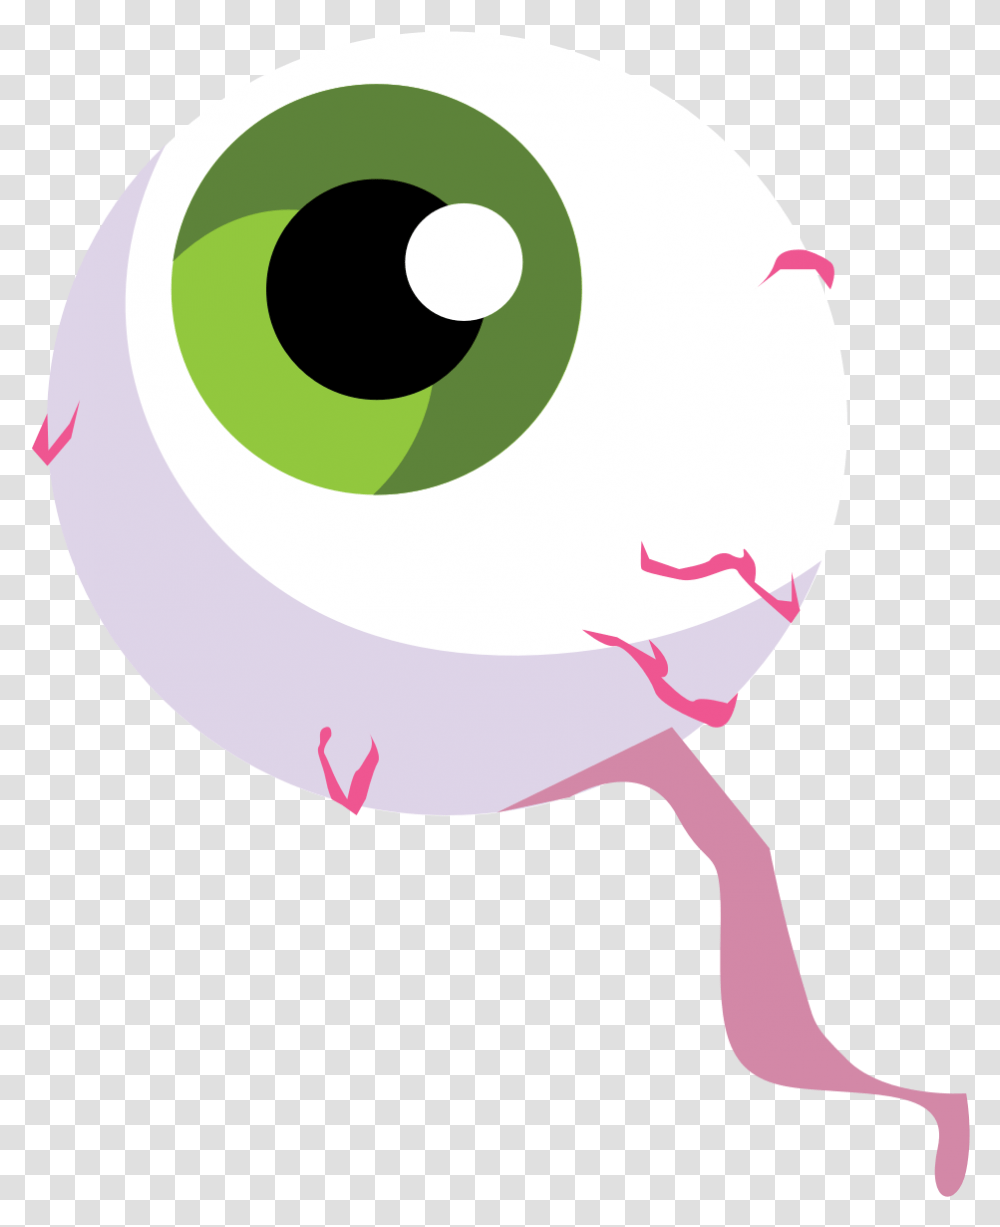 Eyeball Clipart Spooky Eye Balls Halloween Clipart, Clothing, Apparel, Sweets, Food Transparent Png